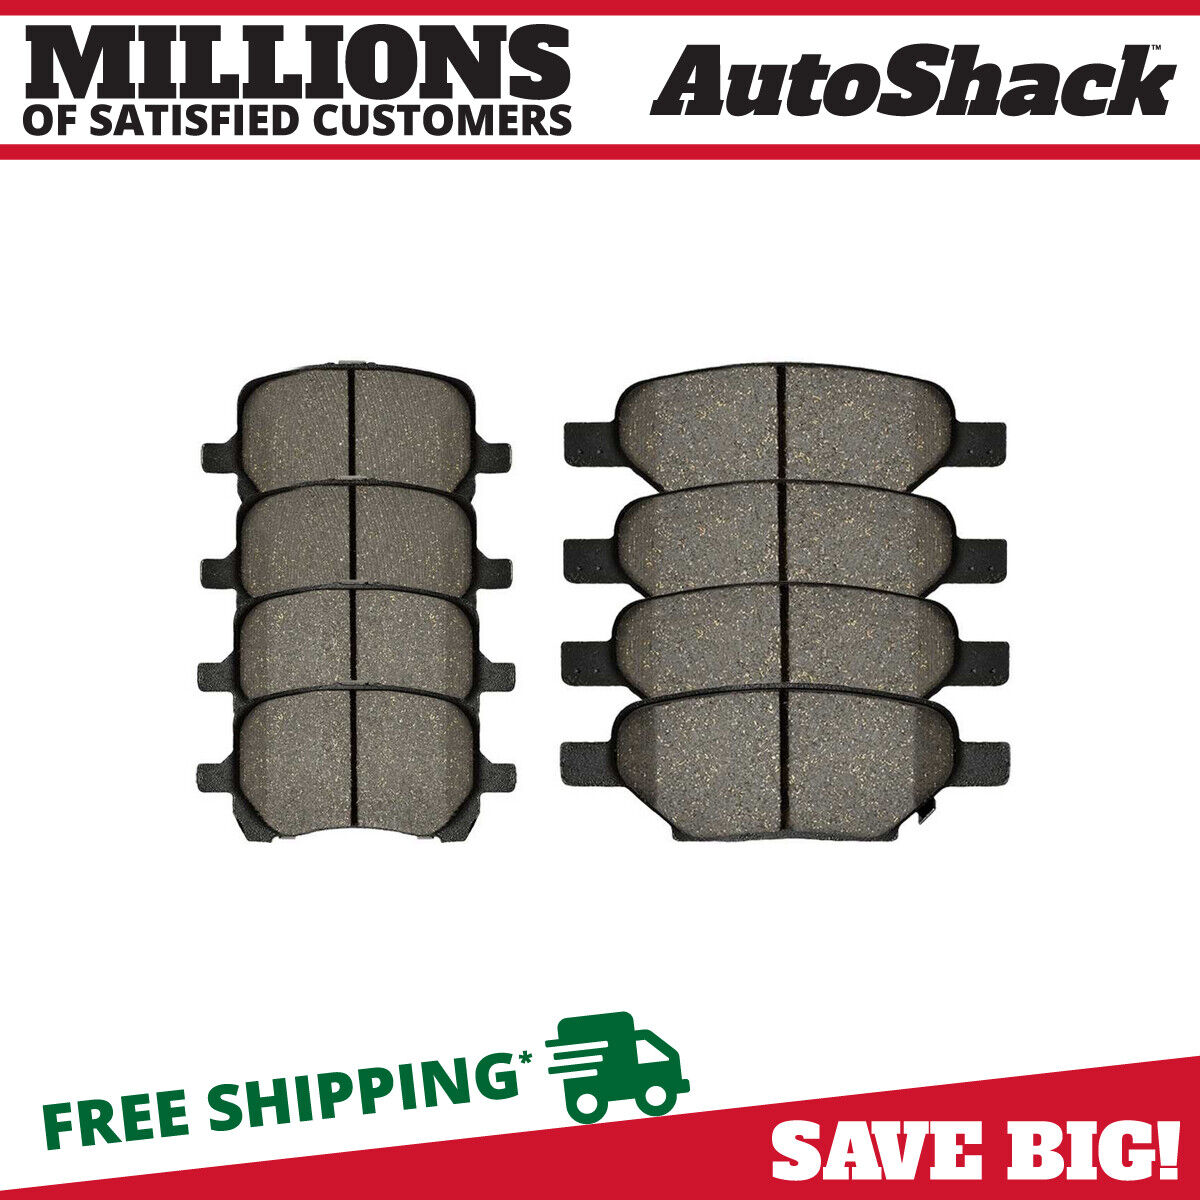 Front and Rear Brake Pads for Pontiac G6 G5 Saturn Aura 2004-2012 Chevy Malibu